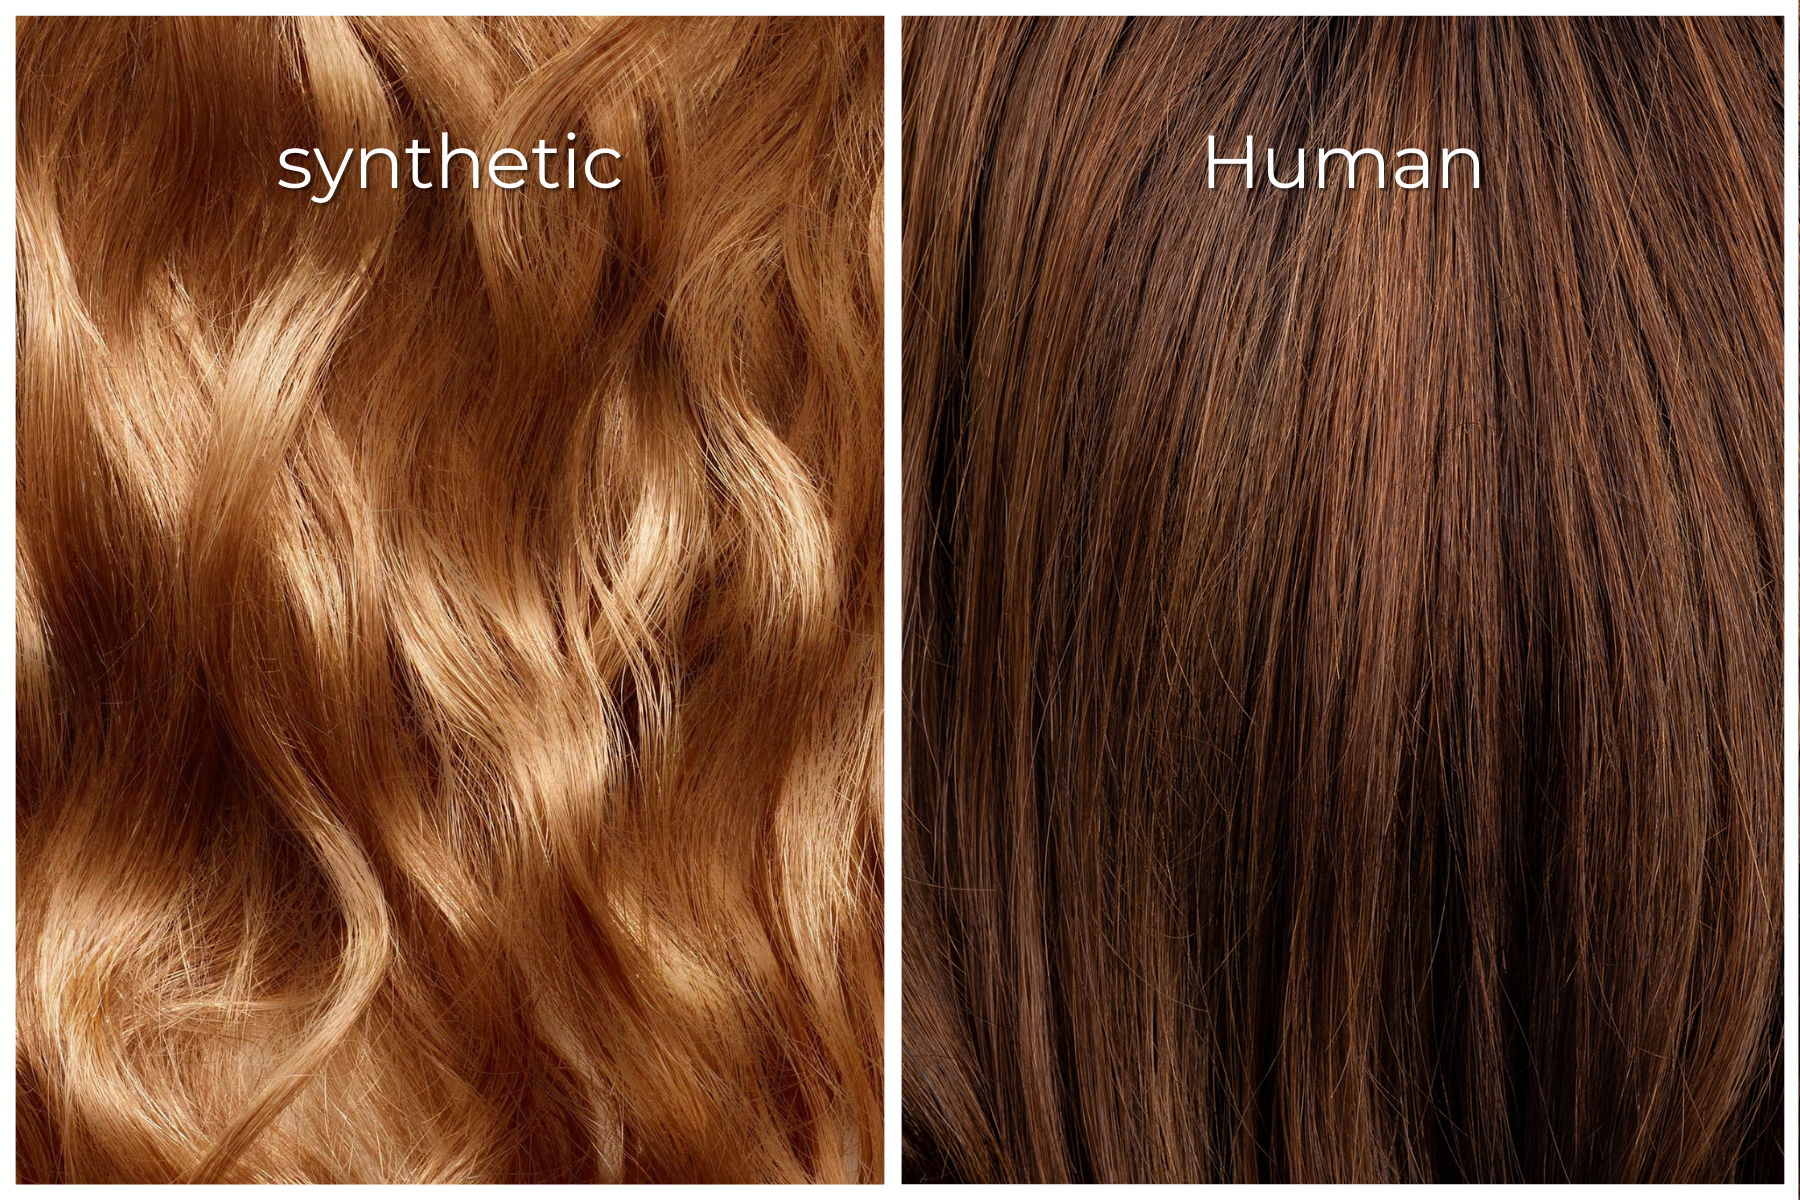 What is the difference between human hair and “fake” hair?